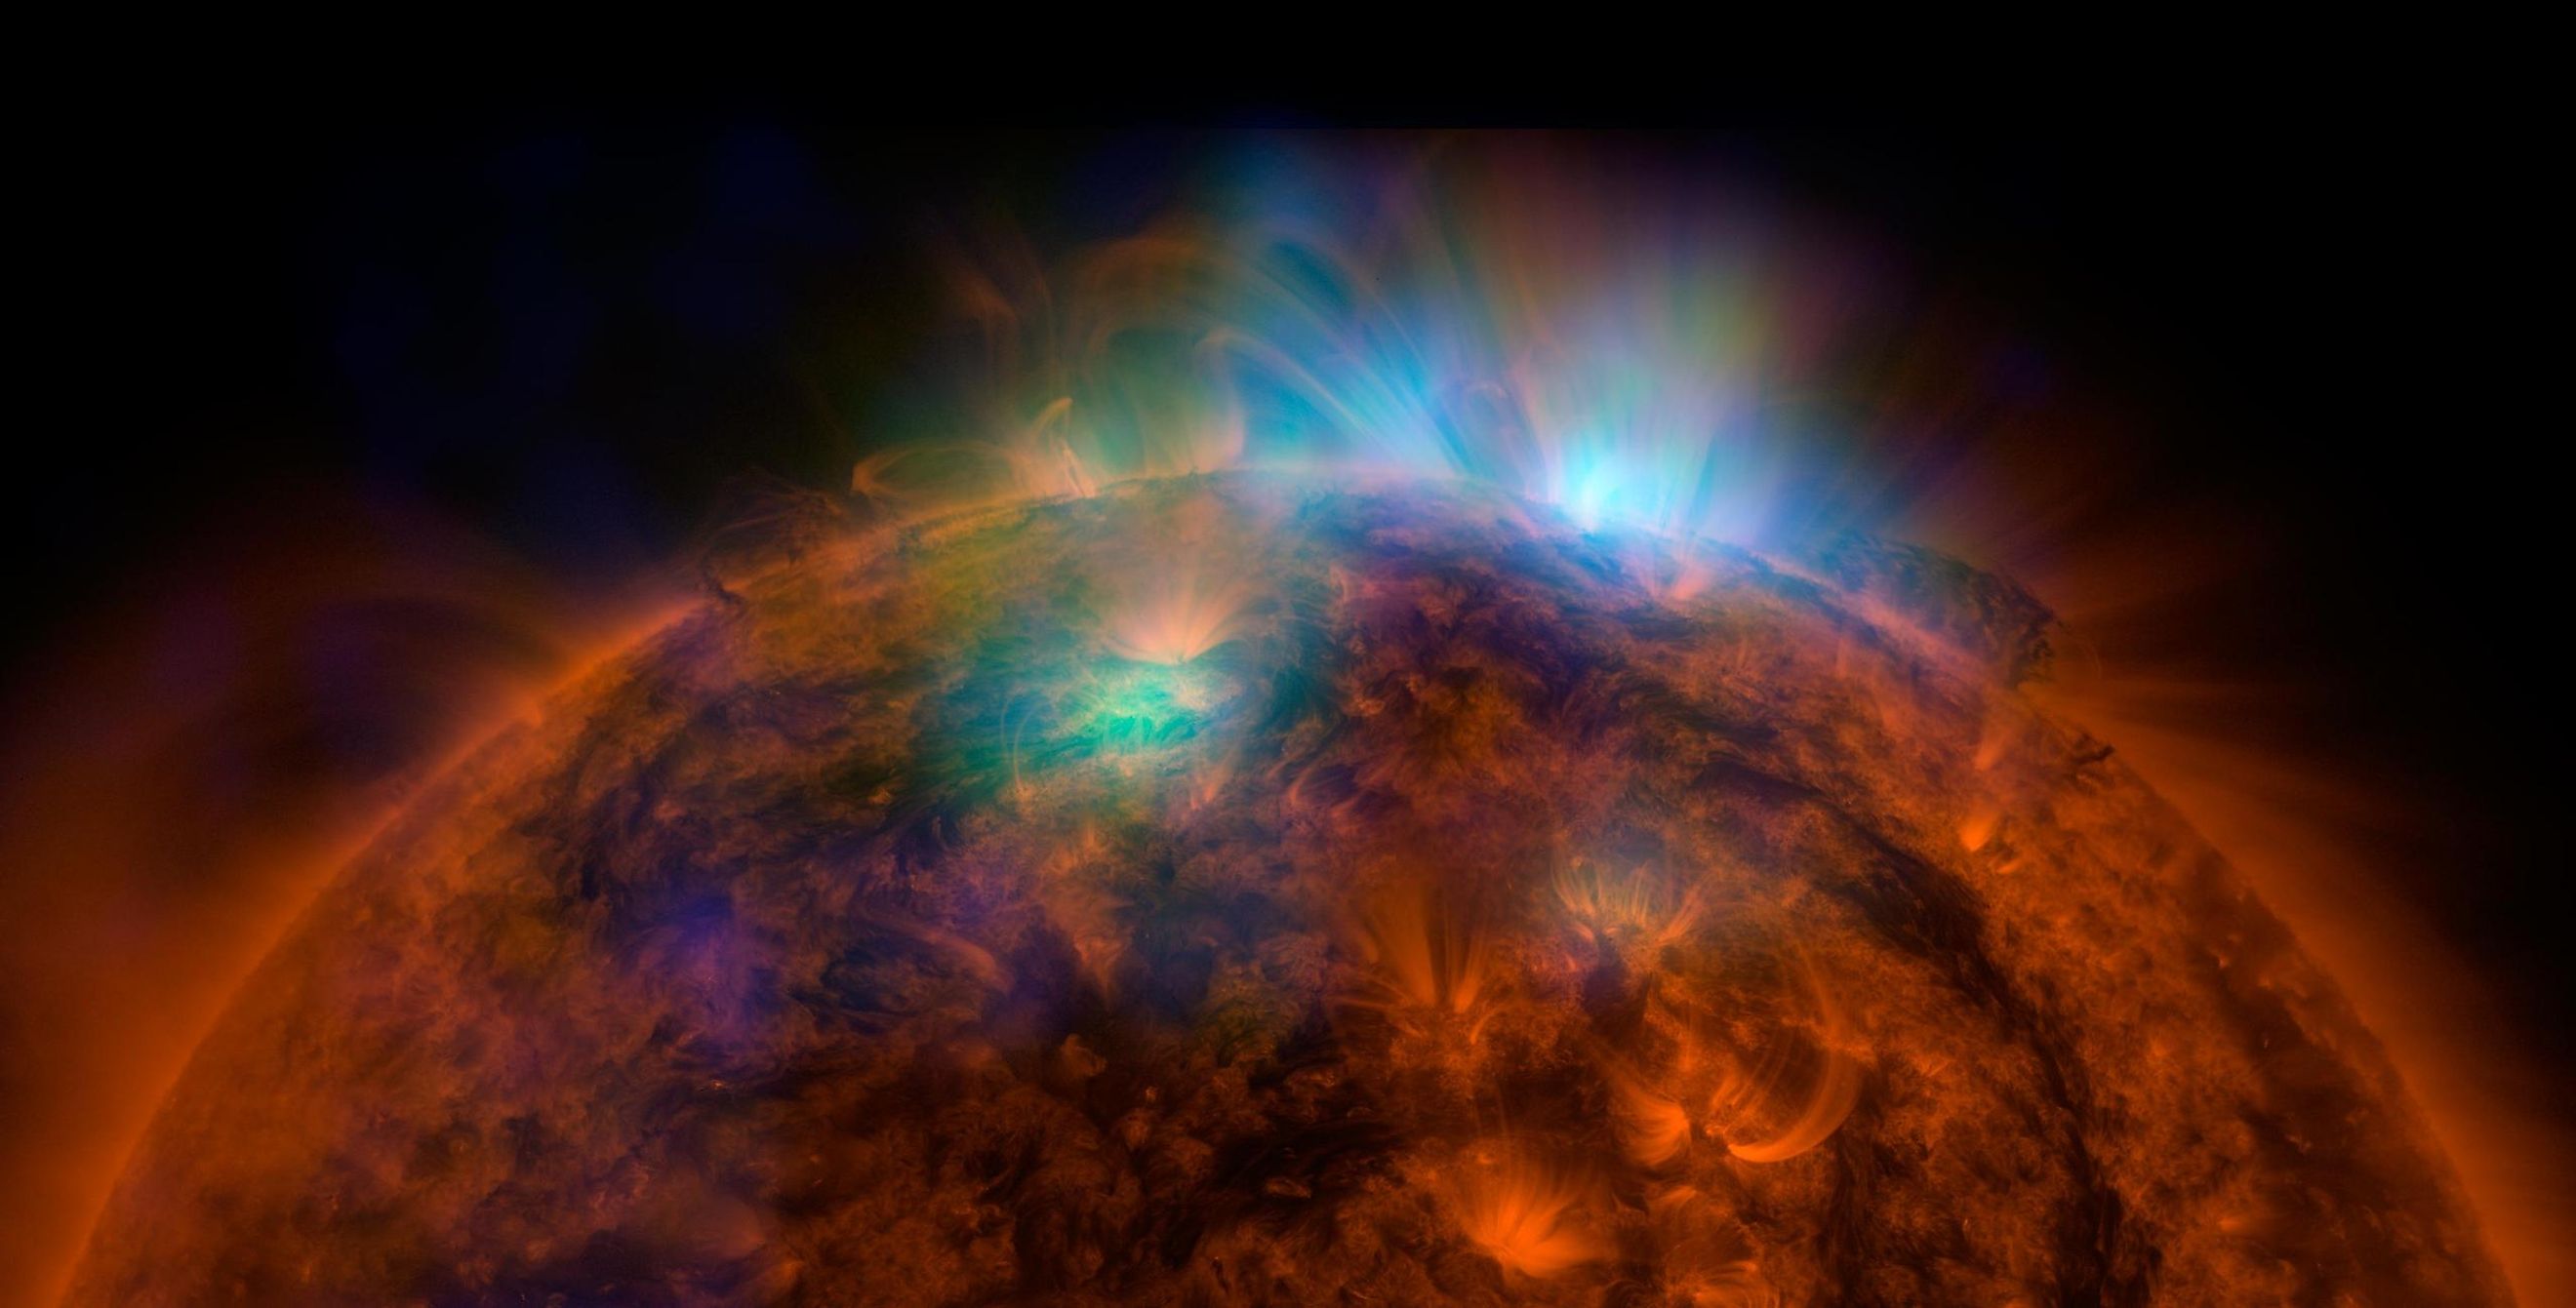 An Image Showing the Flares and Active Regions of the Sun Captured by NASA's Telescopes